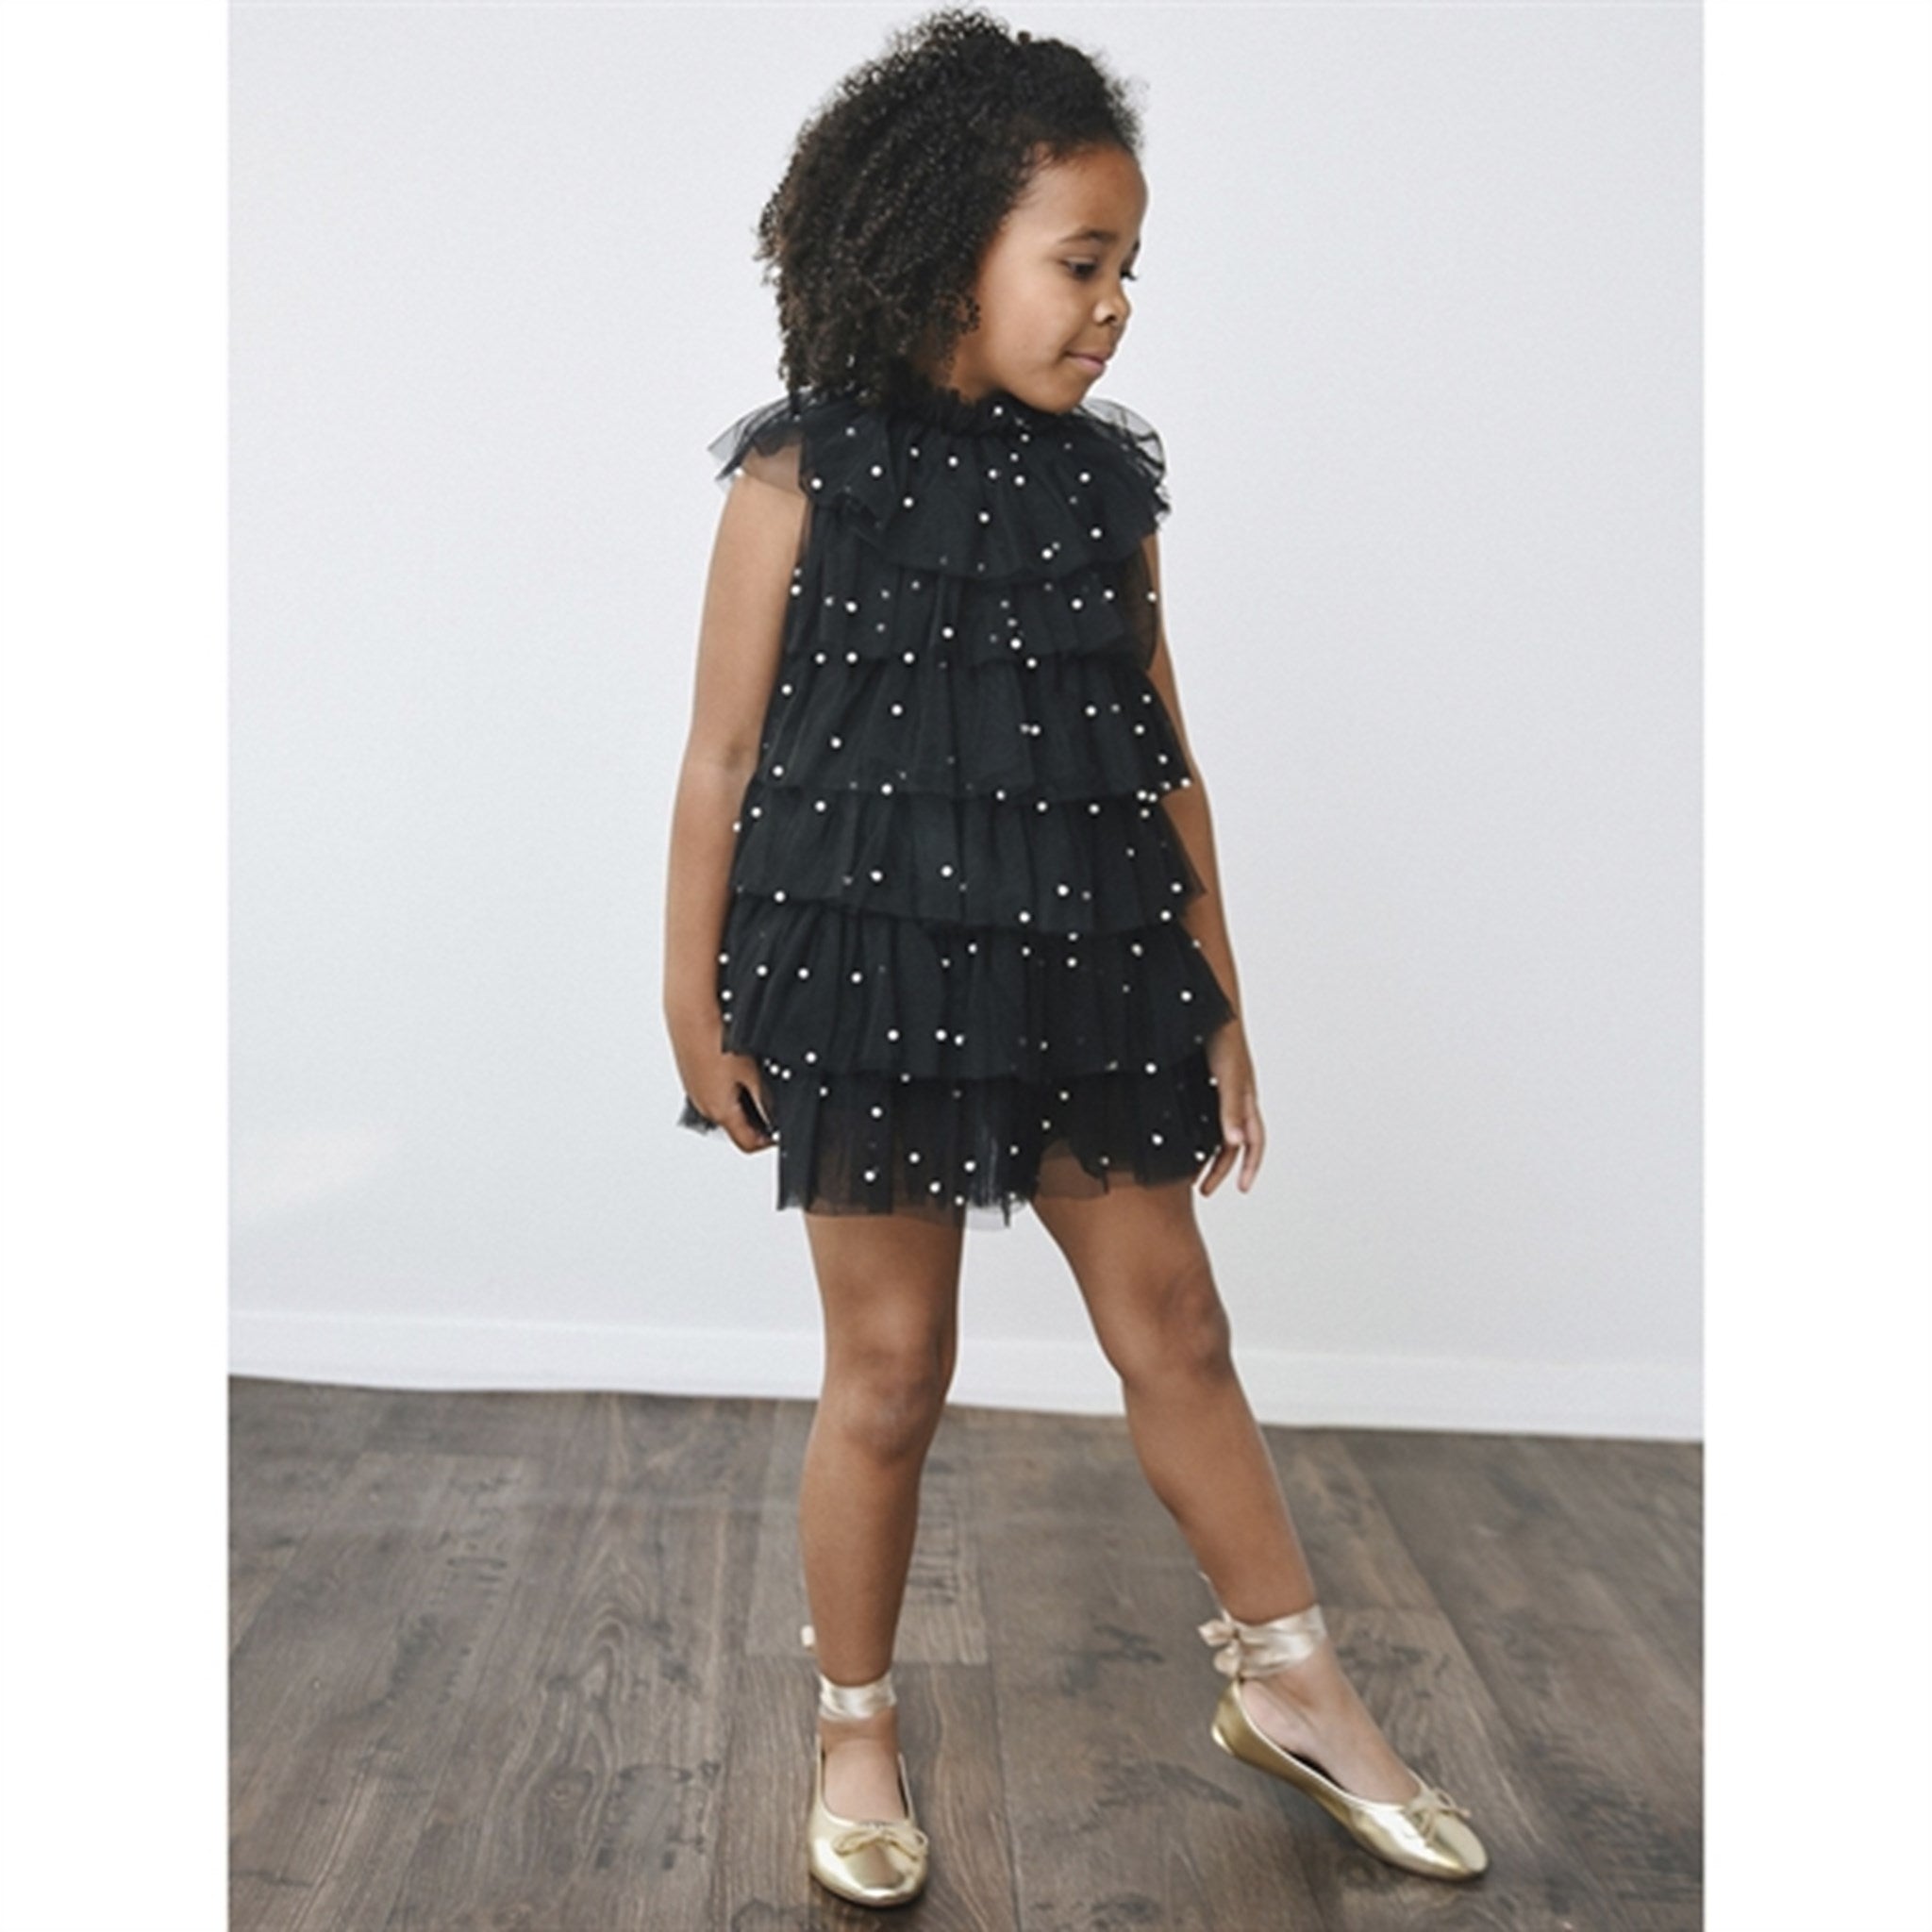 Dolly by Le Petit Tom Pearl Tutully Tiered Tulle Tuttu Dress Black 6